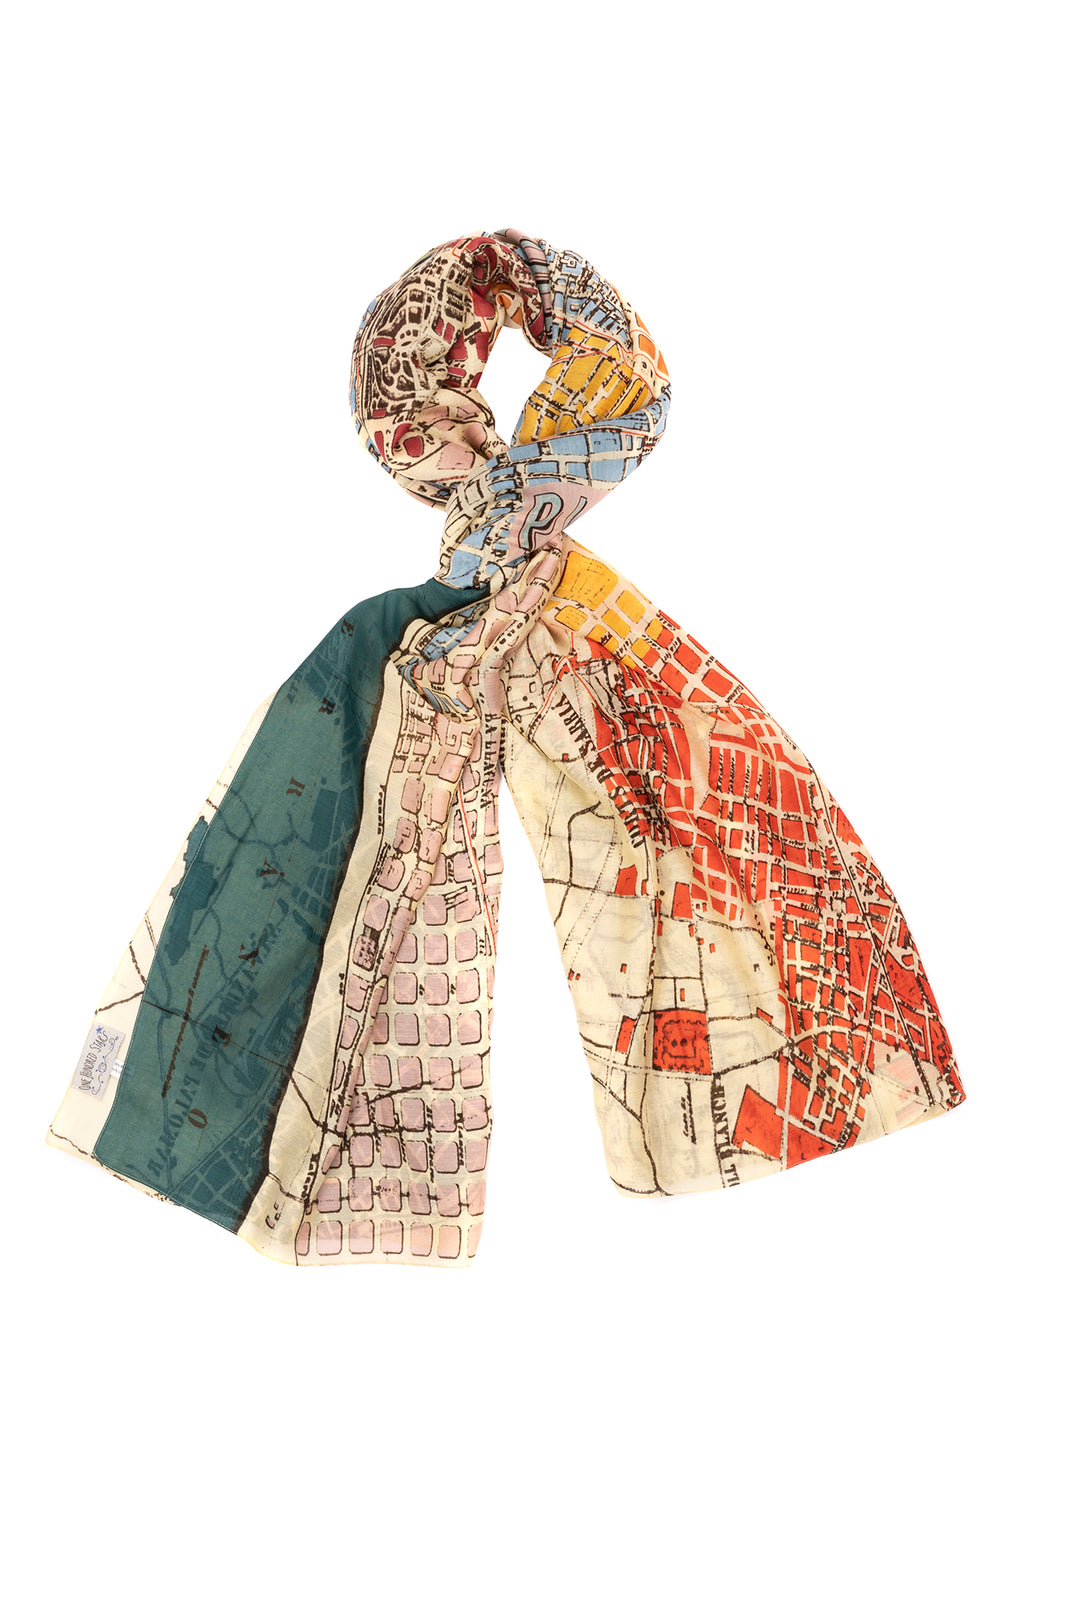 One Hundred Stars Barcelona Map Scarf- Our scarves are a full 100cm x 200cm making them perfect for layering in the winter months or worn as a delicate cover up during the summer seasons. 